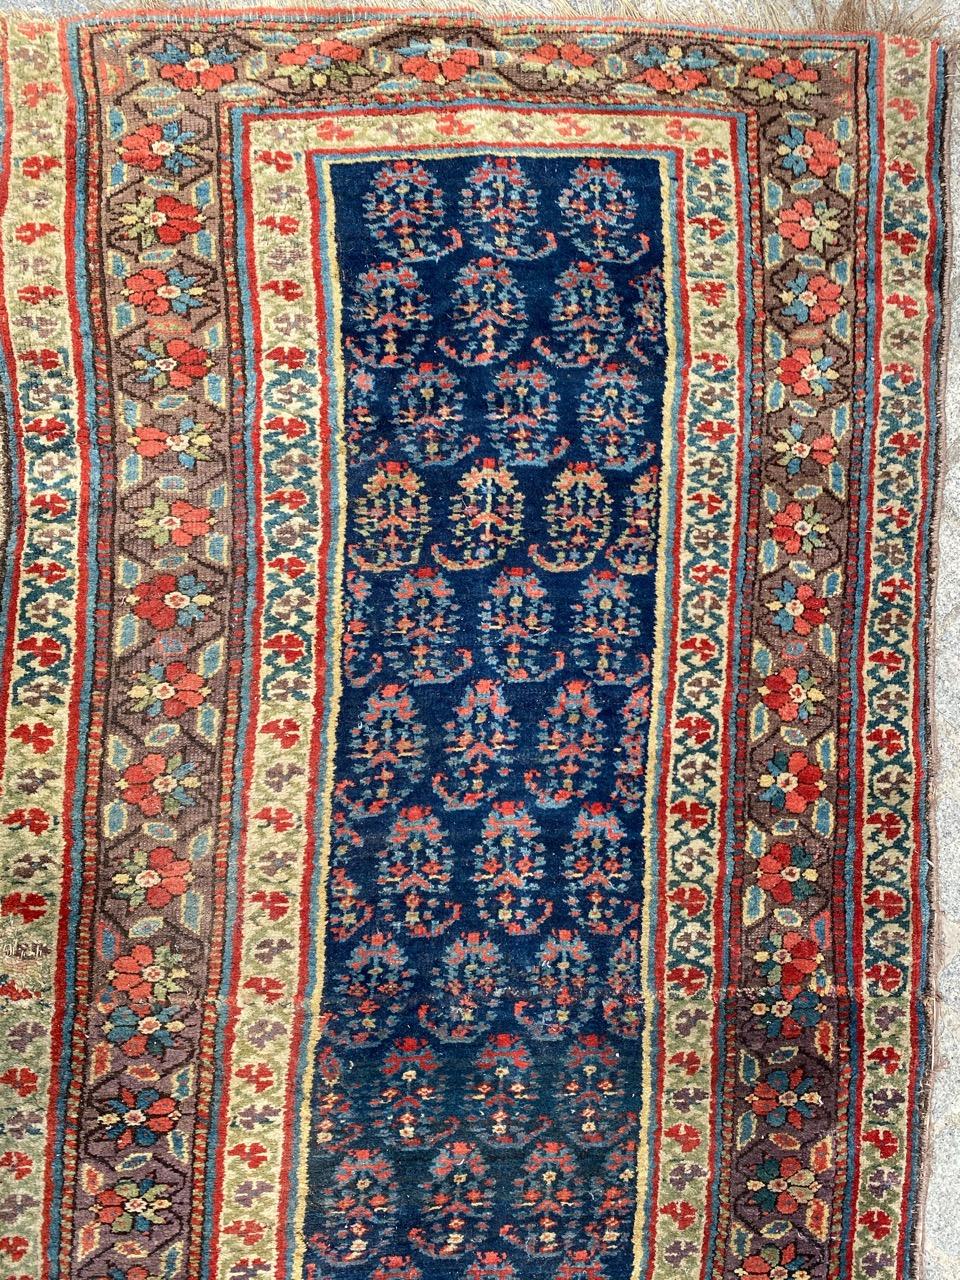 Very beautiful long tribal corridor carpet from the 19th century, with decorative designs by Botteh, and pretty natural colors, entirely hand-knotted in wool velvet on wool foundation.